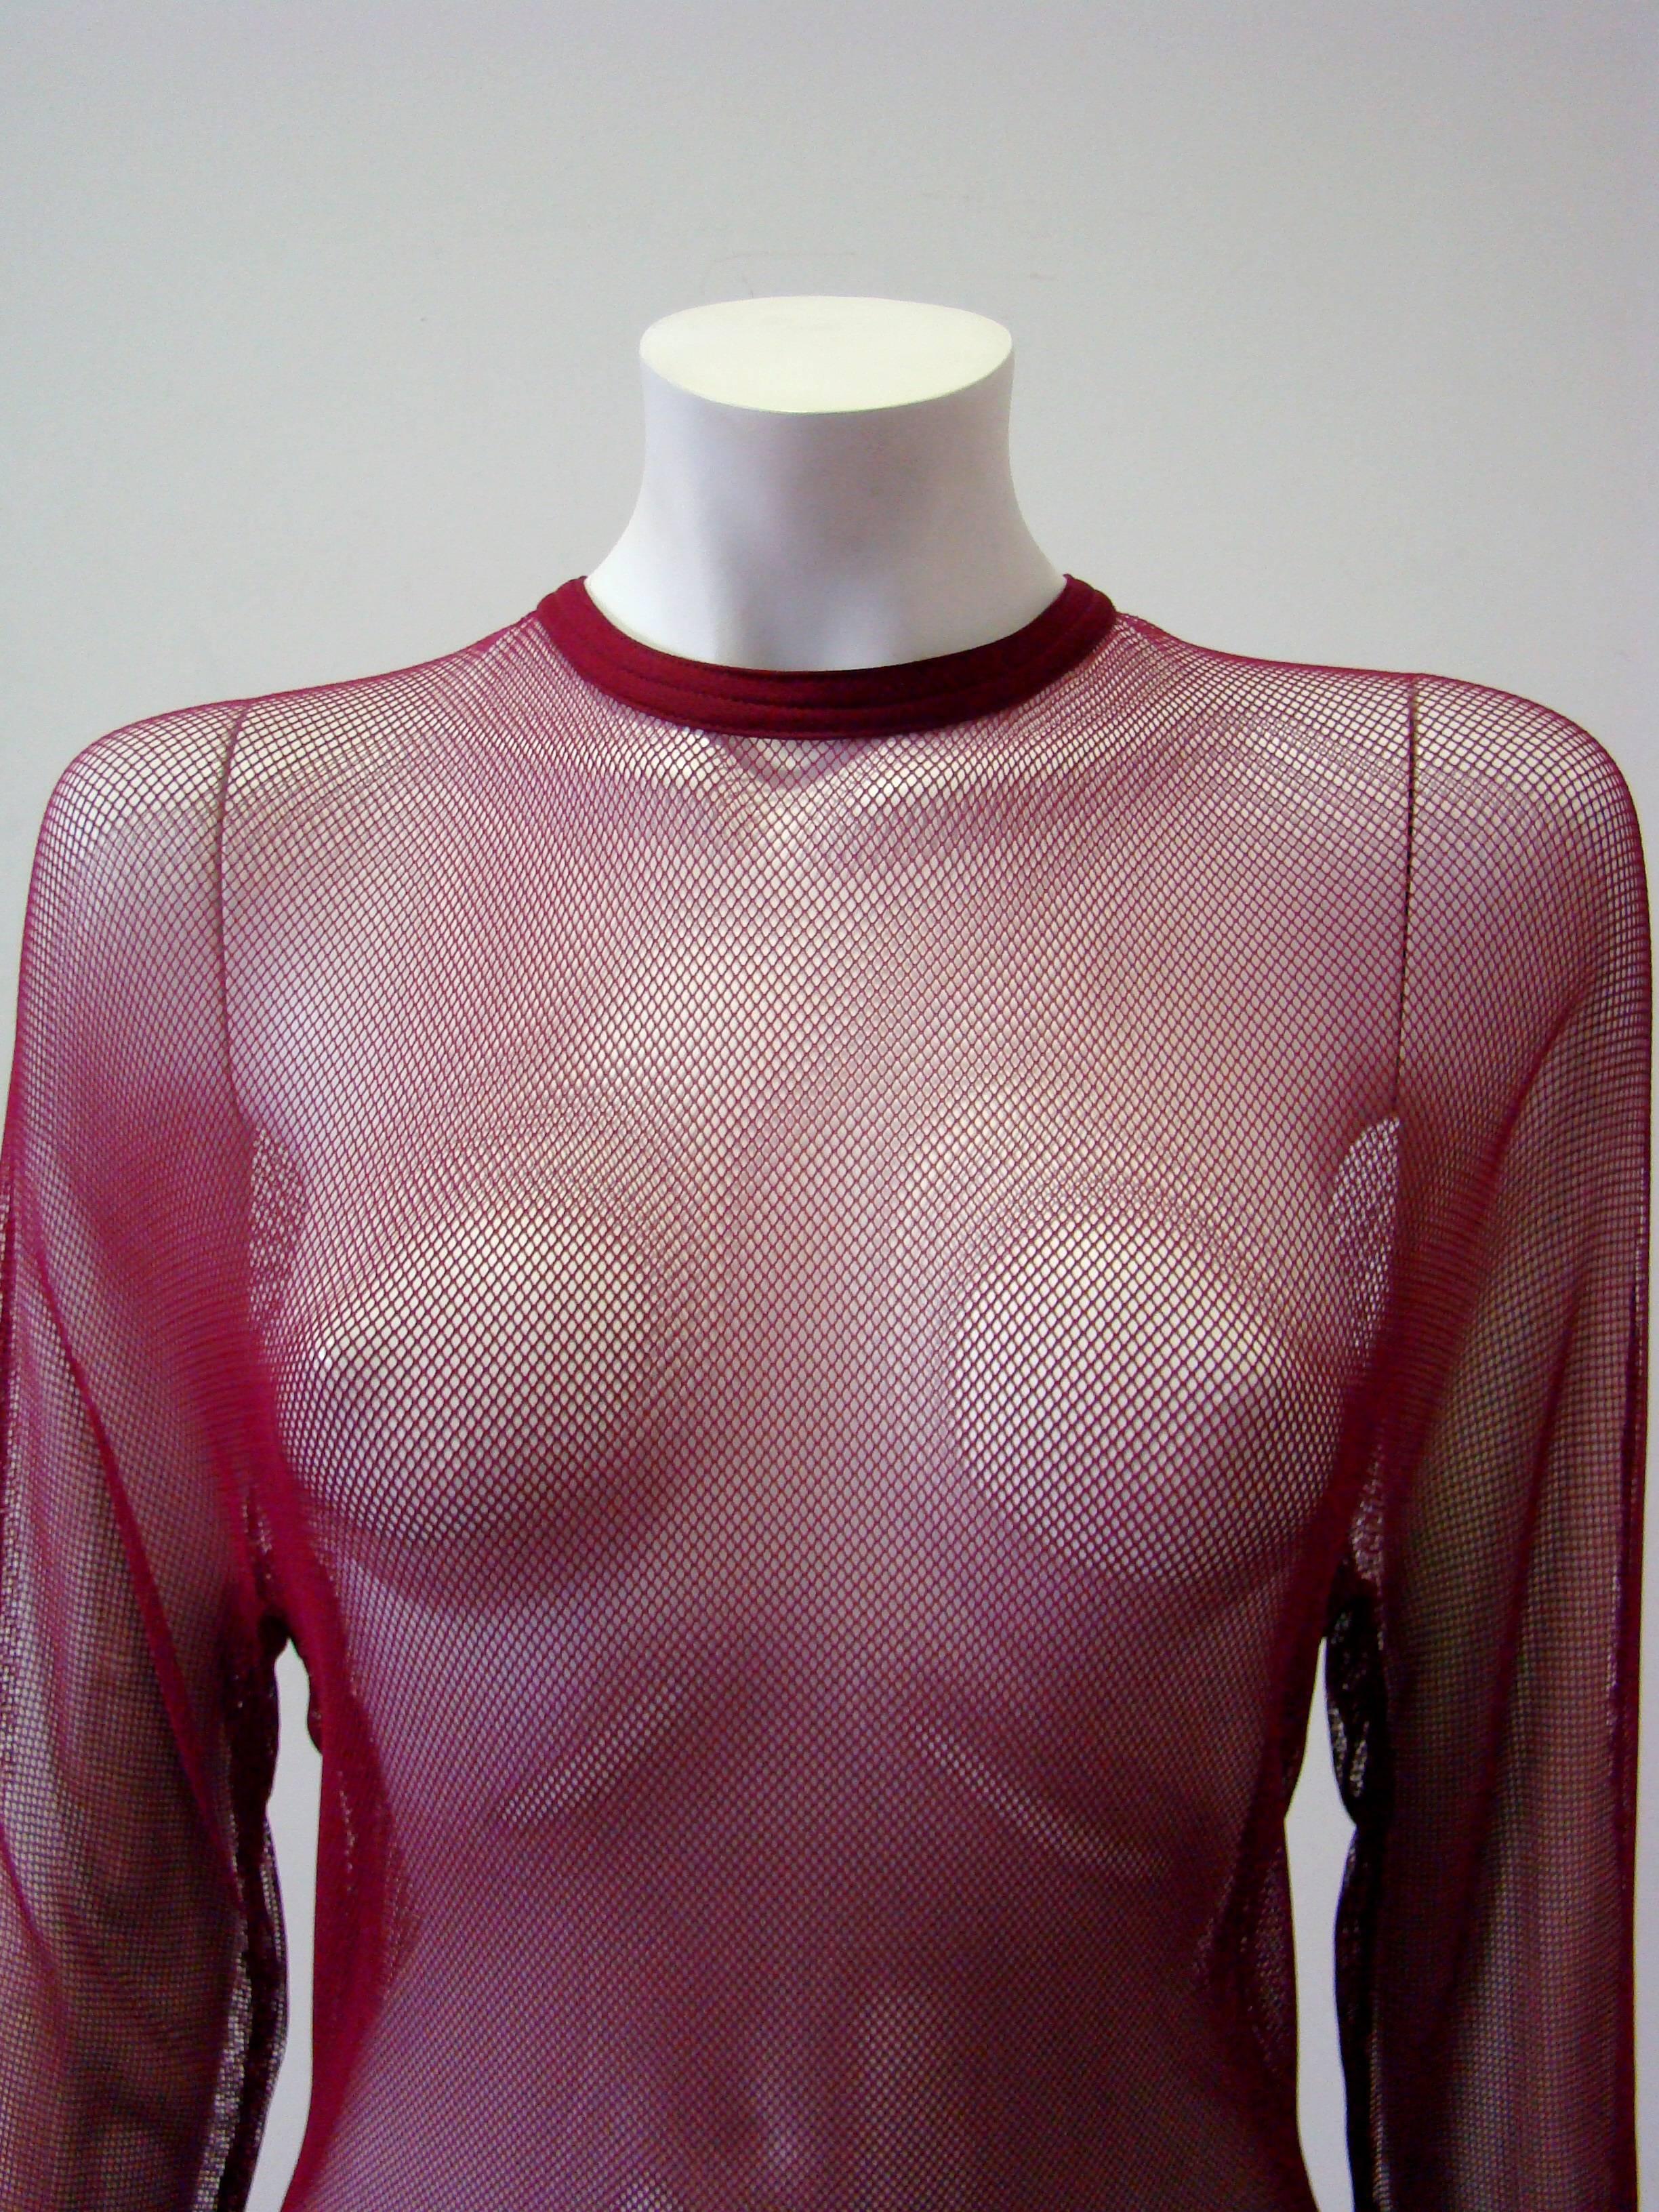 Unique Gianni Versace Net Magenta Dress Fall 1993-1994 In Excellent Condition For Sale In Athens, Agia Paraskevi